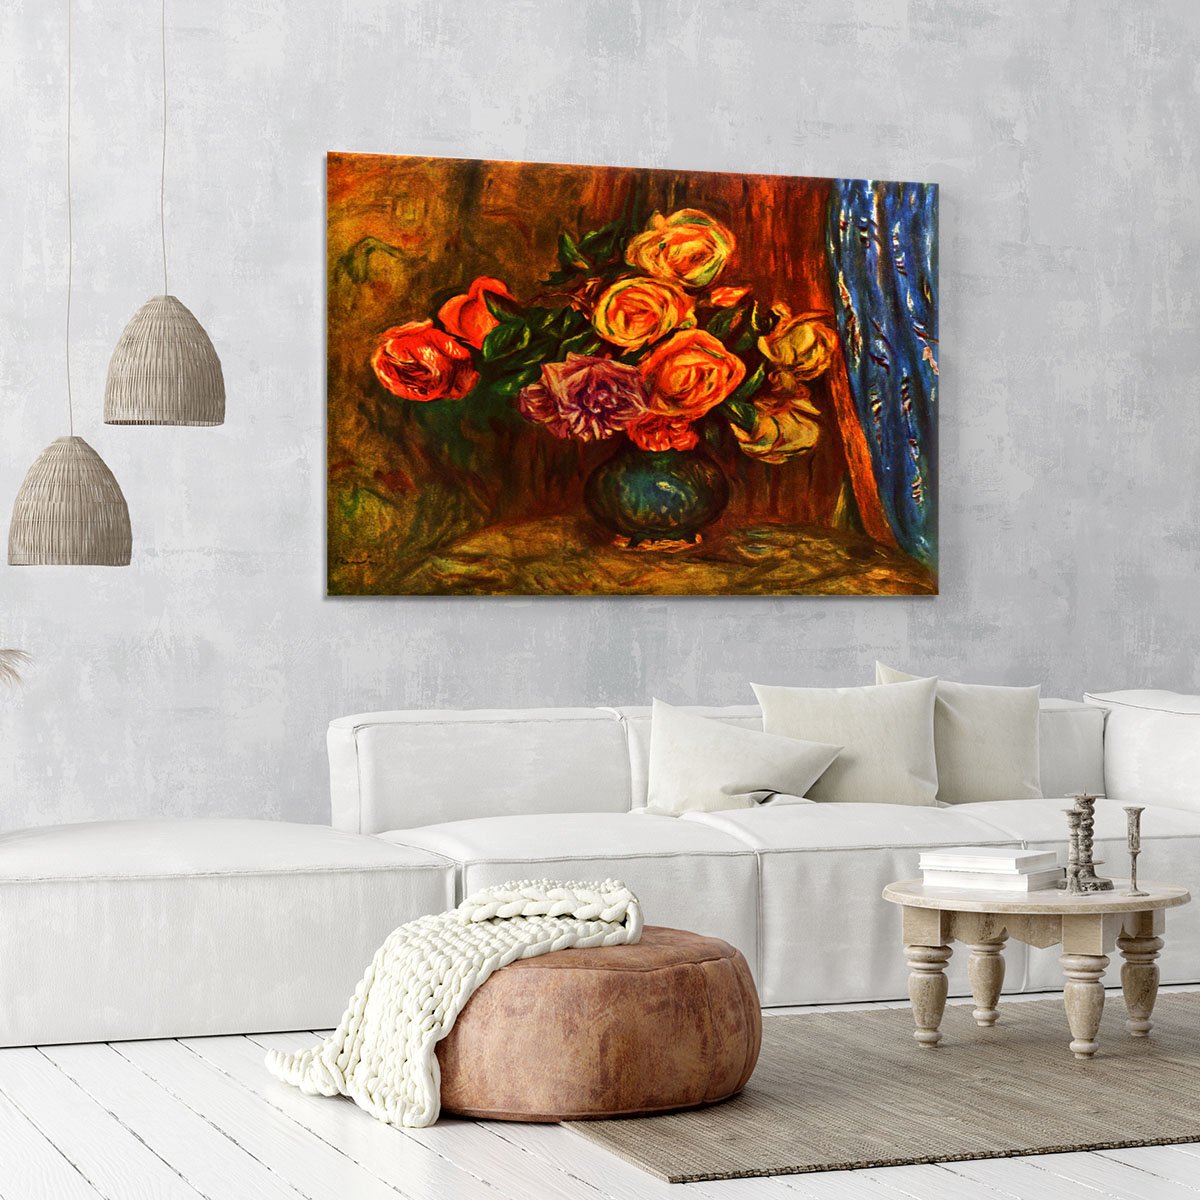 Still life roses before a blue curtain by Renoir Canvas Print or Poster